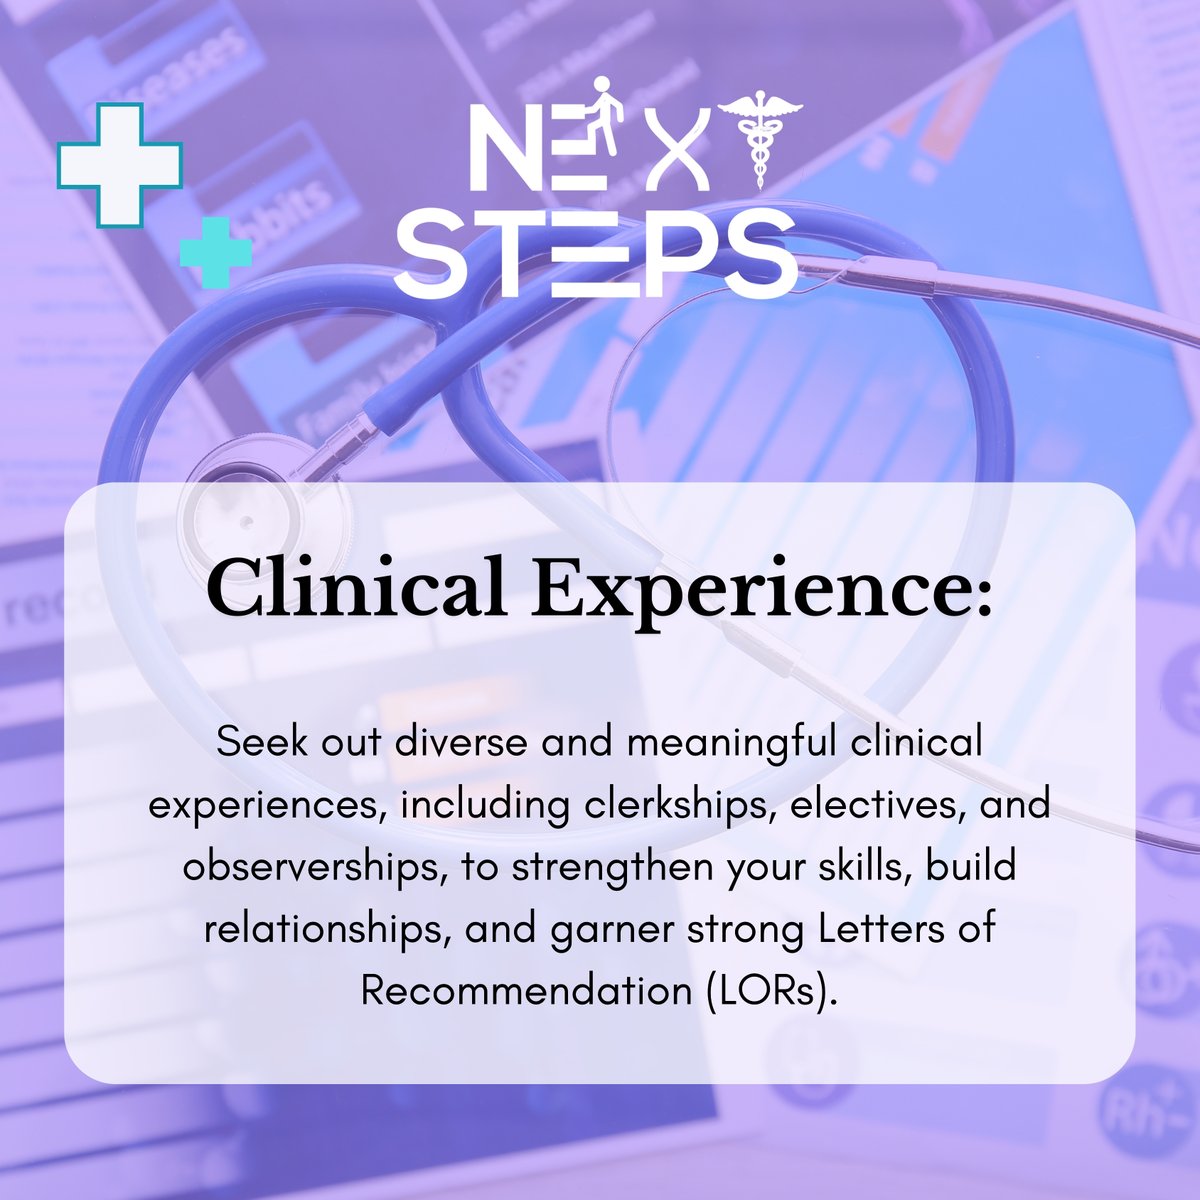 💼 Start early, study smart, and shine in your clinical experiences! Here's how to ace the USMLE and secure your dream residency spot in 2025. 💫
For USMLE Residency Match: nextstepscareer.com/match-strategy/

#USMLE #Residency #residencymatch #usmlematch #match #nextsteps #nextstepsusmle